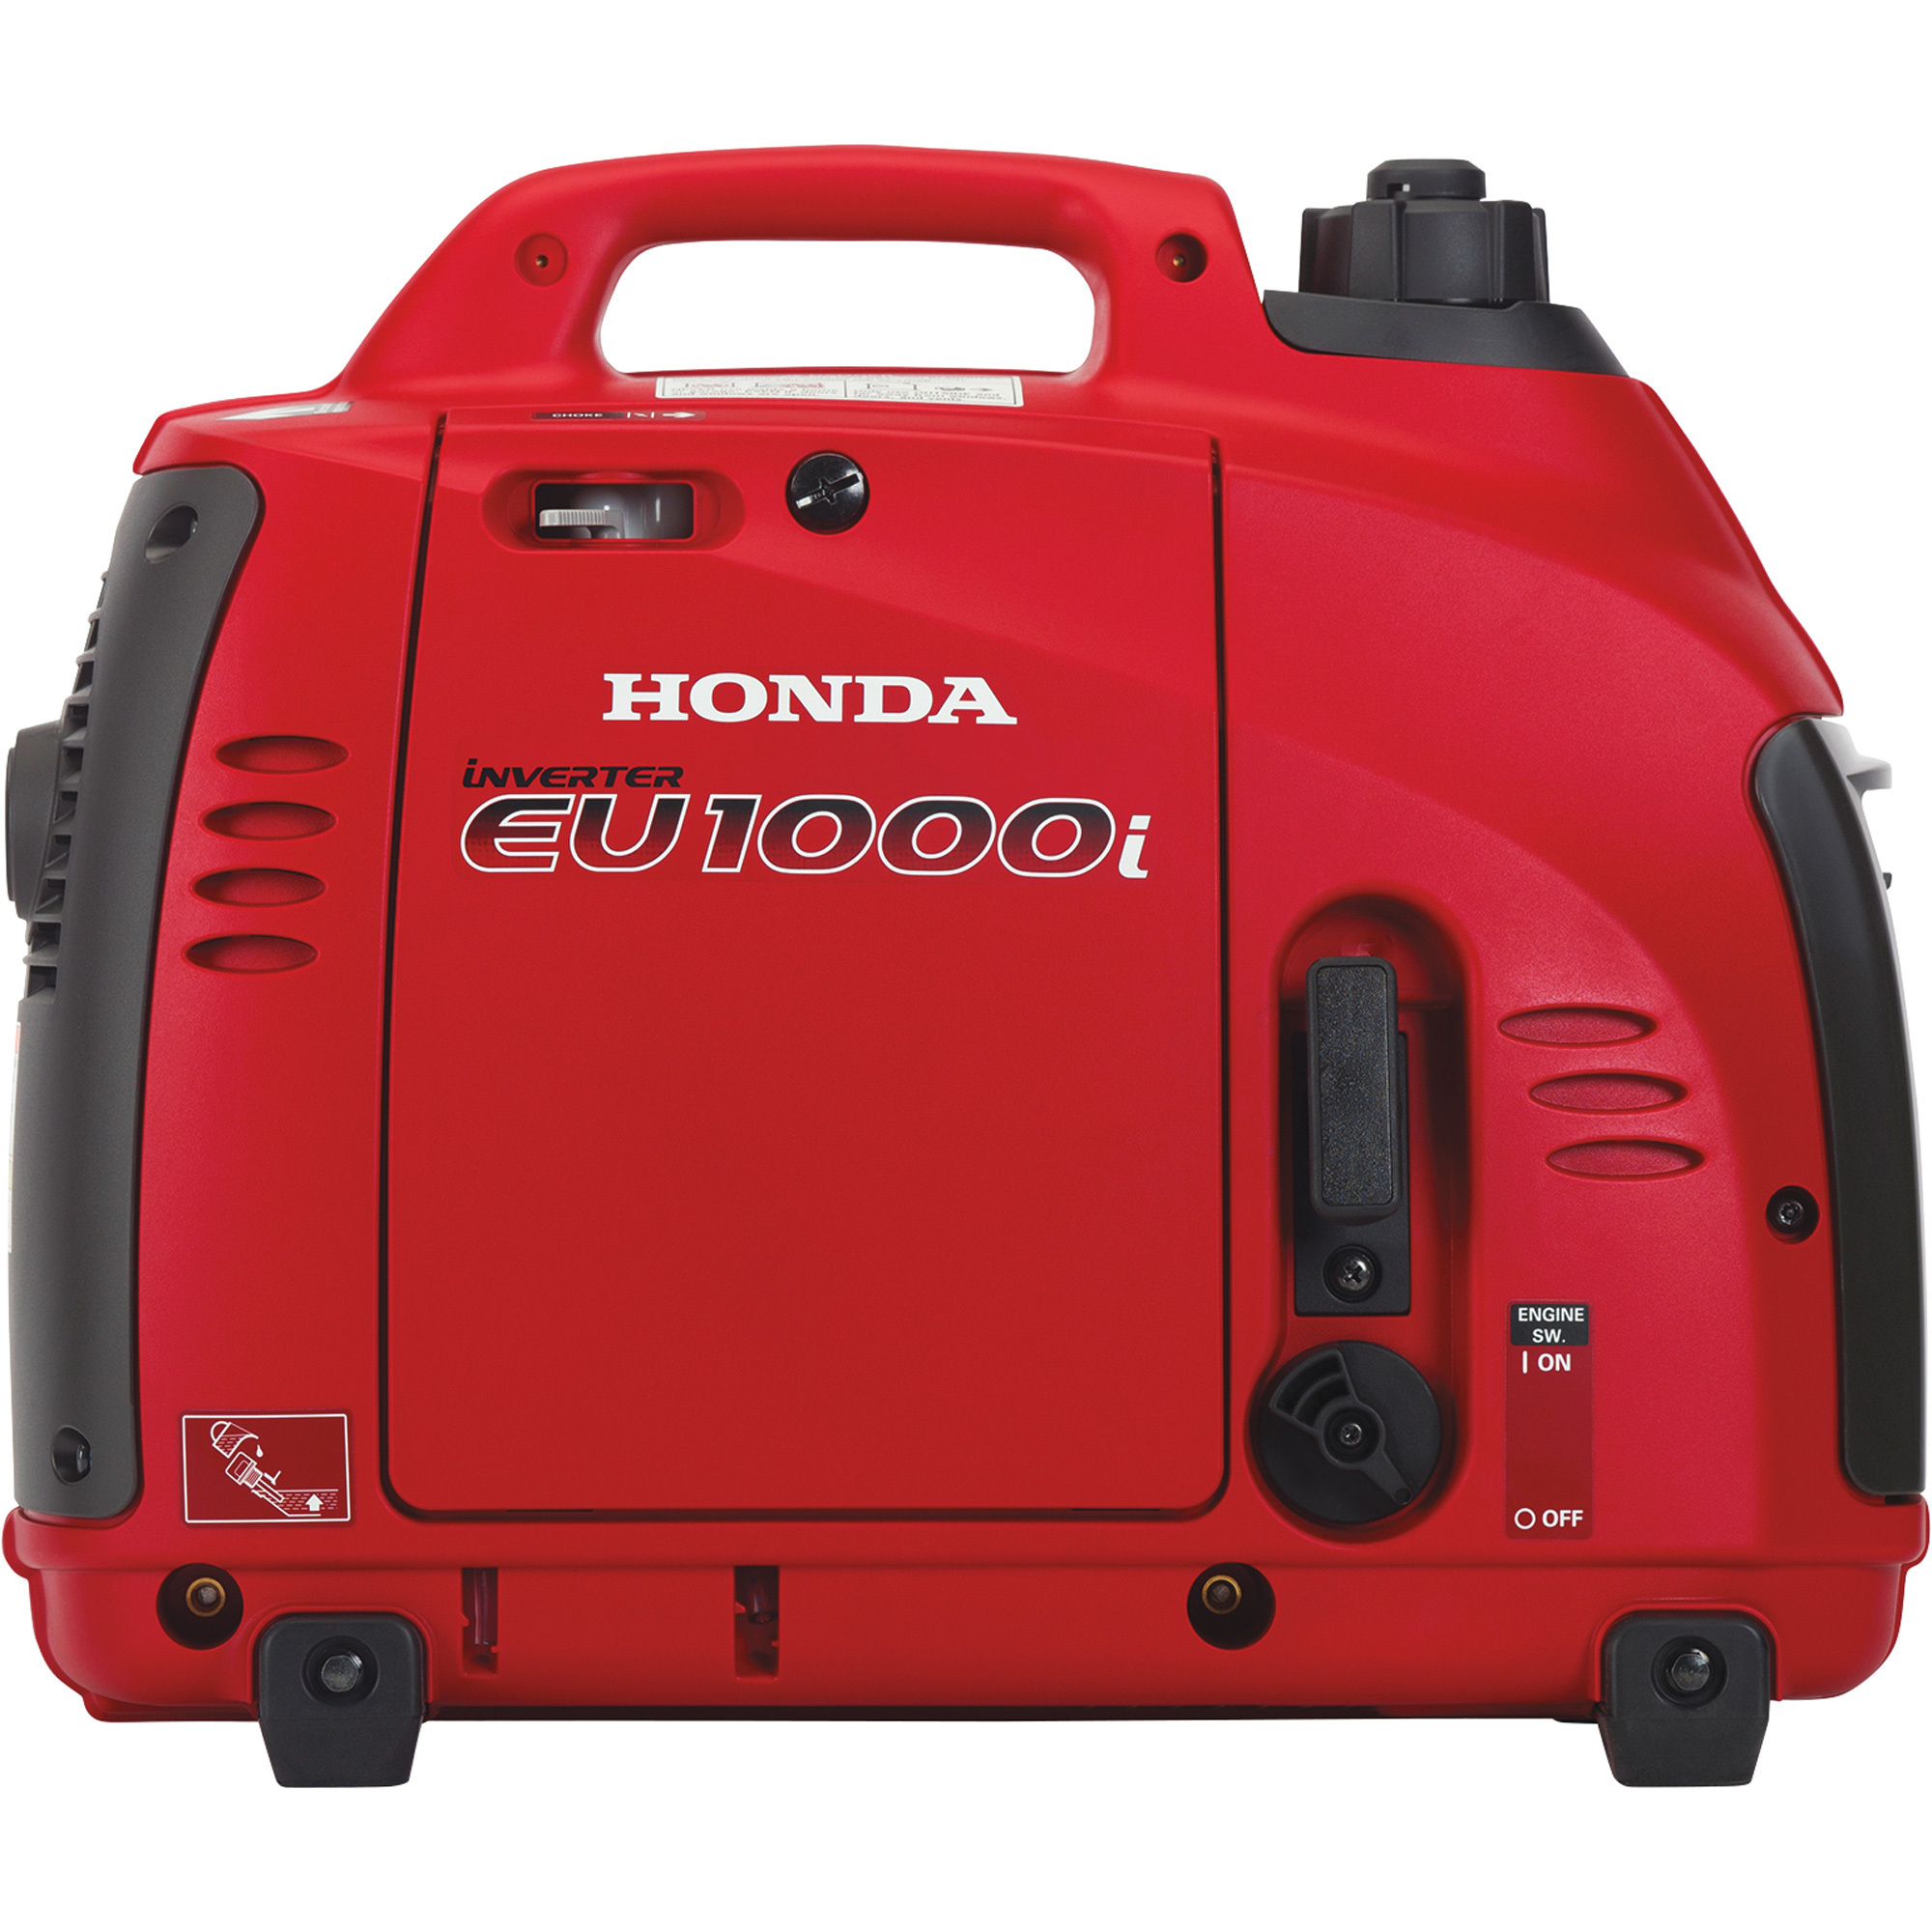 Honda EU1000i Generator, 1000W/900W, CARB with CO Minder for Safety, EU1000T1AG | Northern Tool